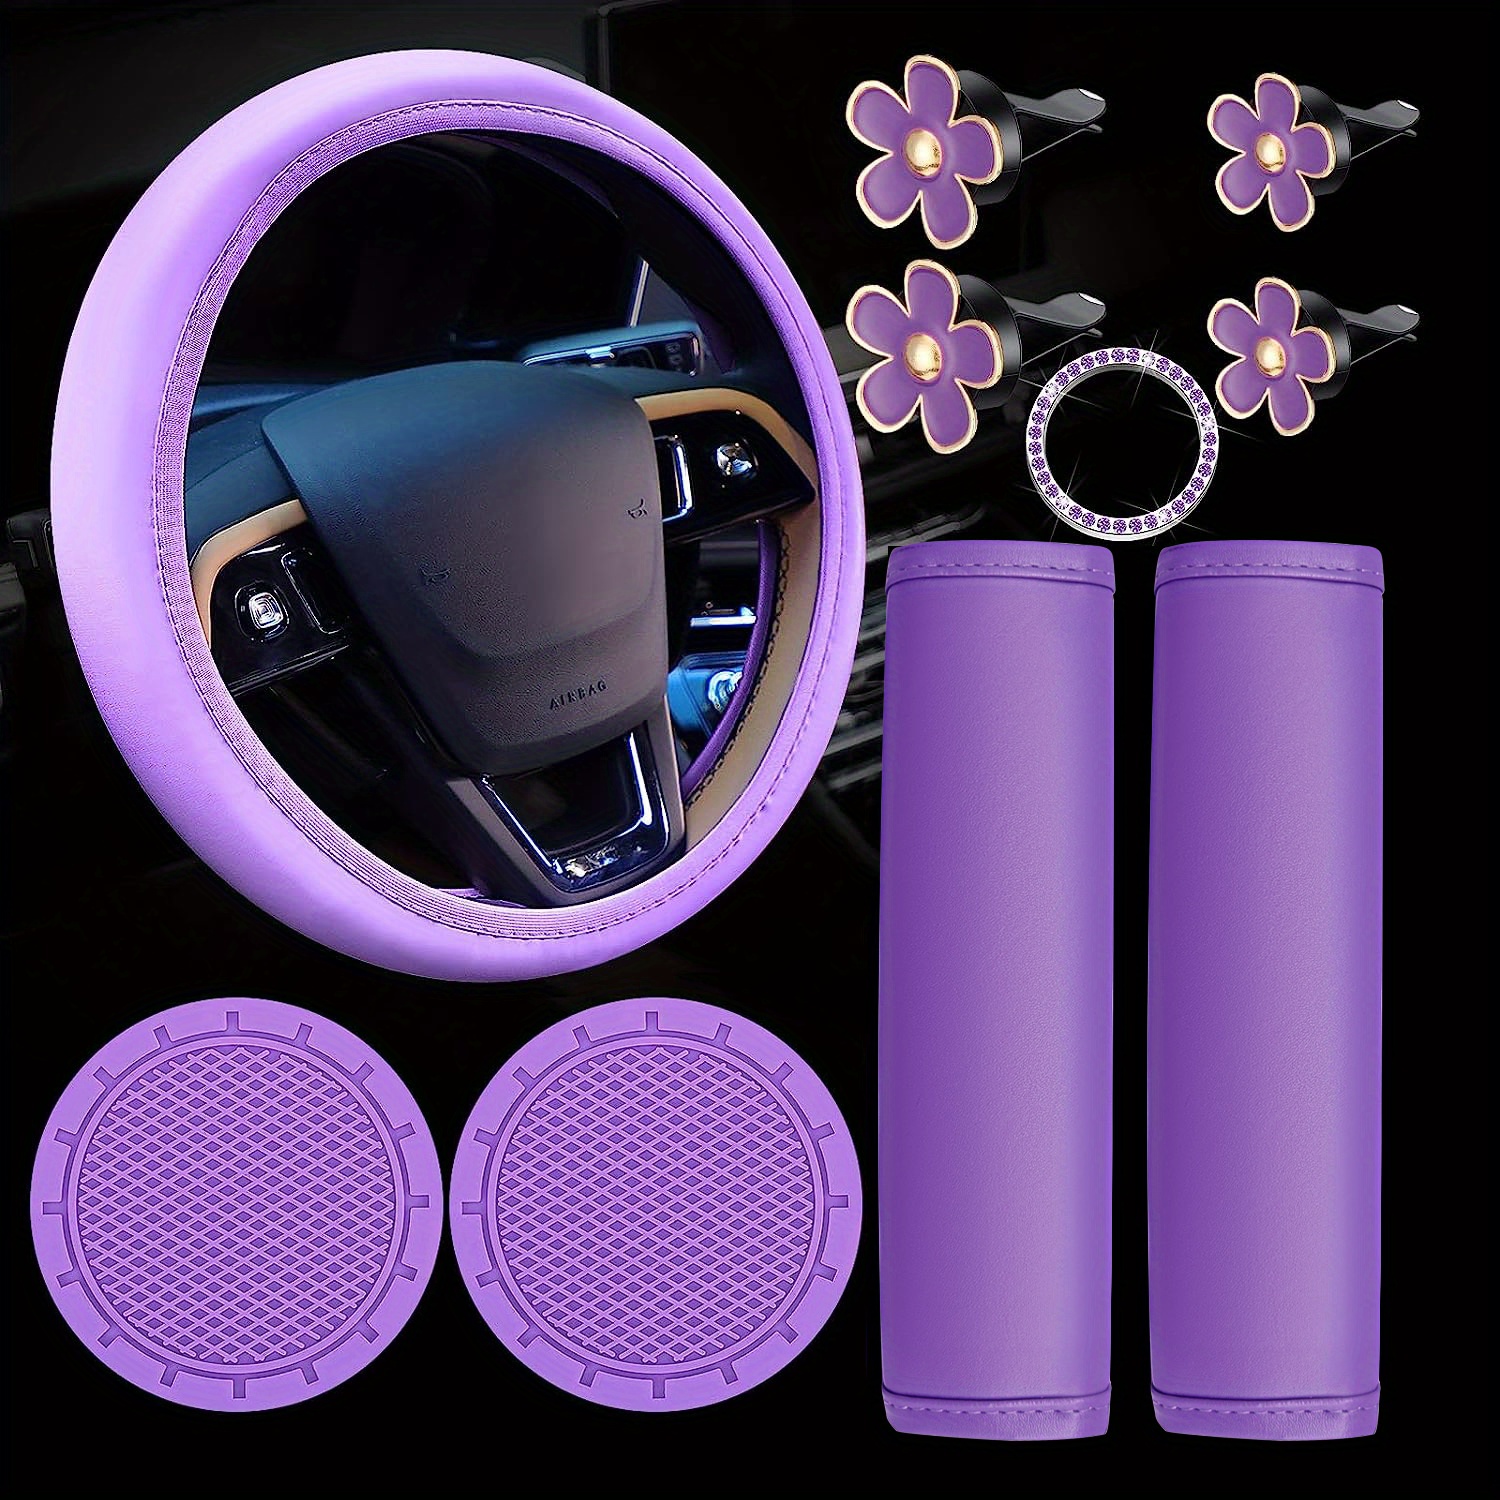 Noble Purple Diamond Car Interior Accessories for Women Crystal Pendant  Leather Steering Wheel Covers Tissue Box Car Ornaments